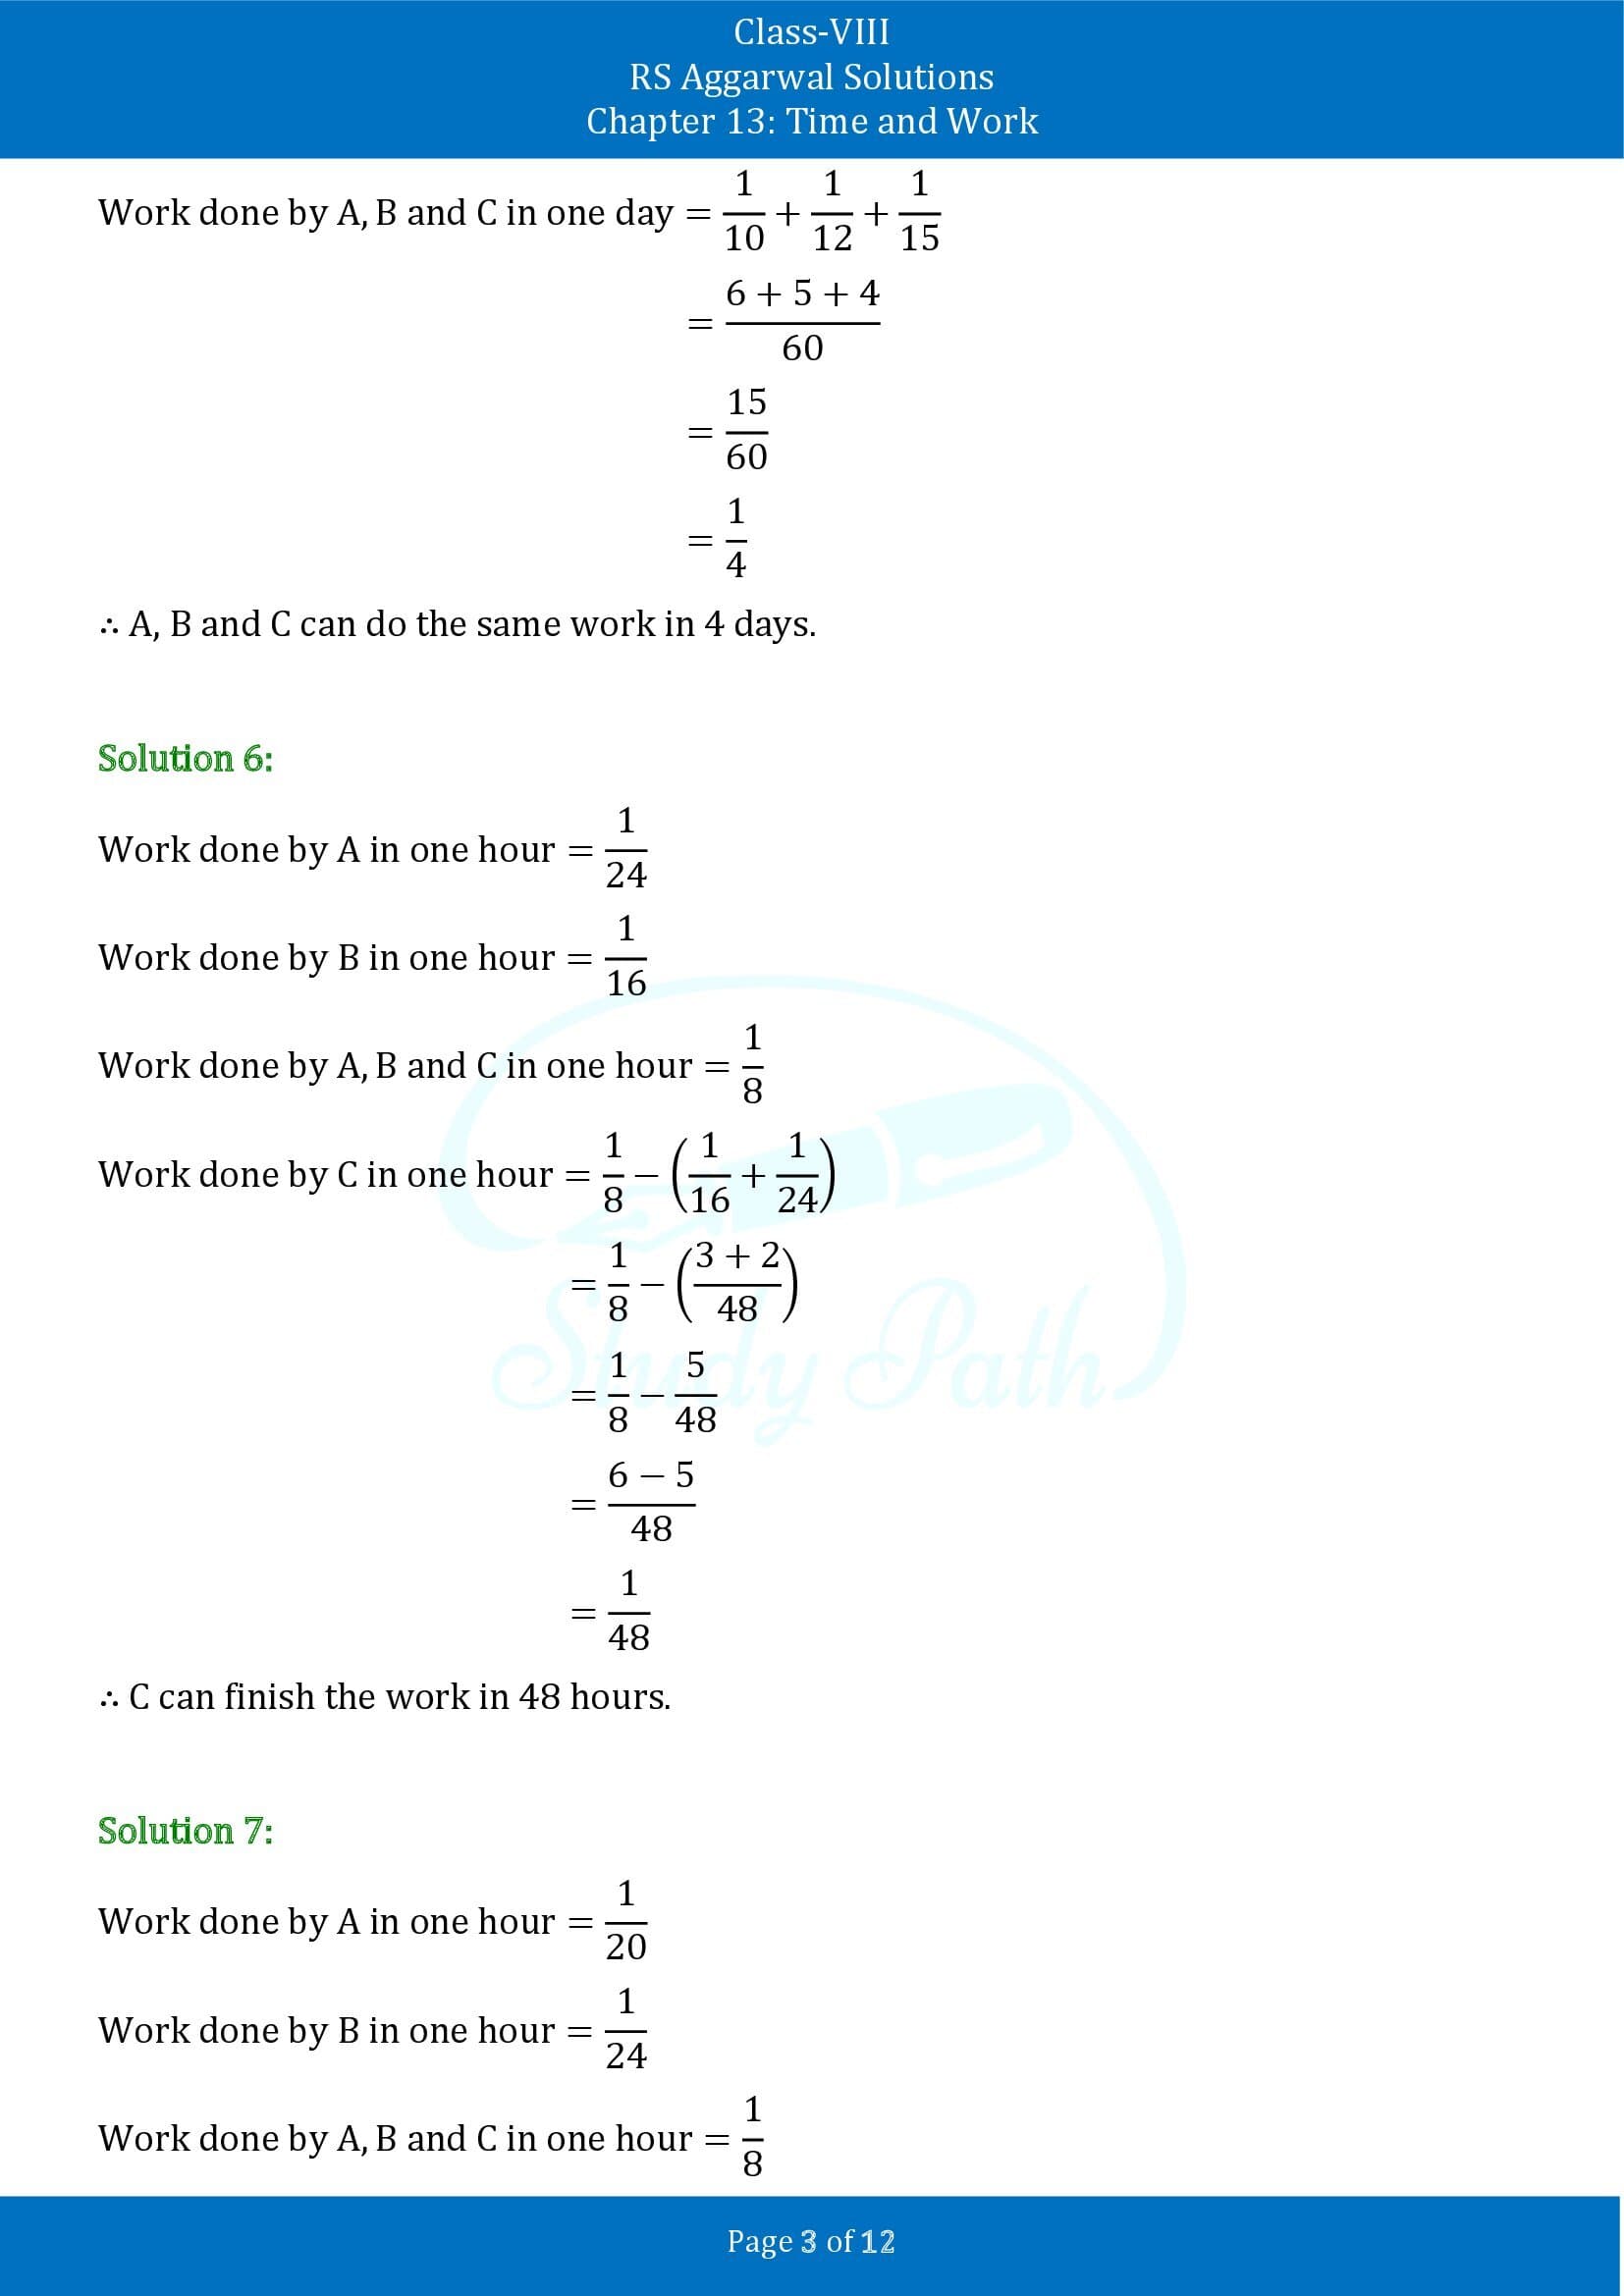 RS Aggarwal Solutions Class 8 Chapter 13 Time and Work Exercise 13A 00003